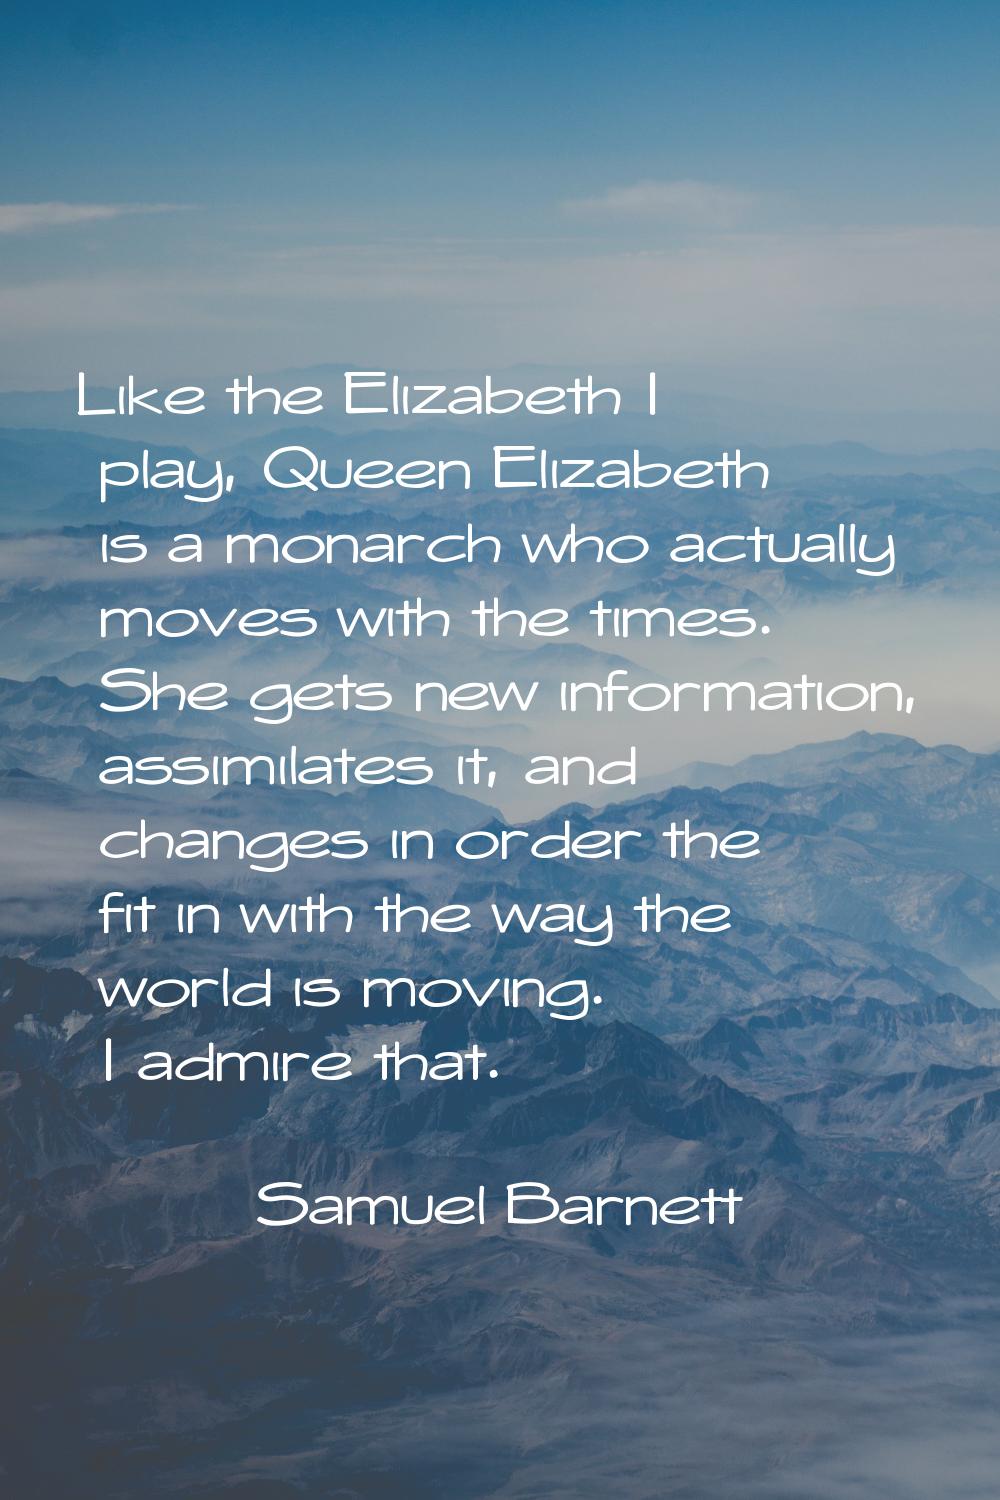 Like the Elizabeth I play, Queen Elizabeth is a monarch who actually moves with the times. She gets